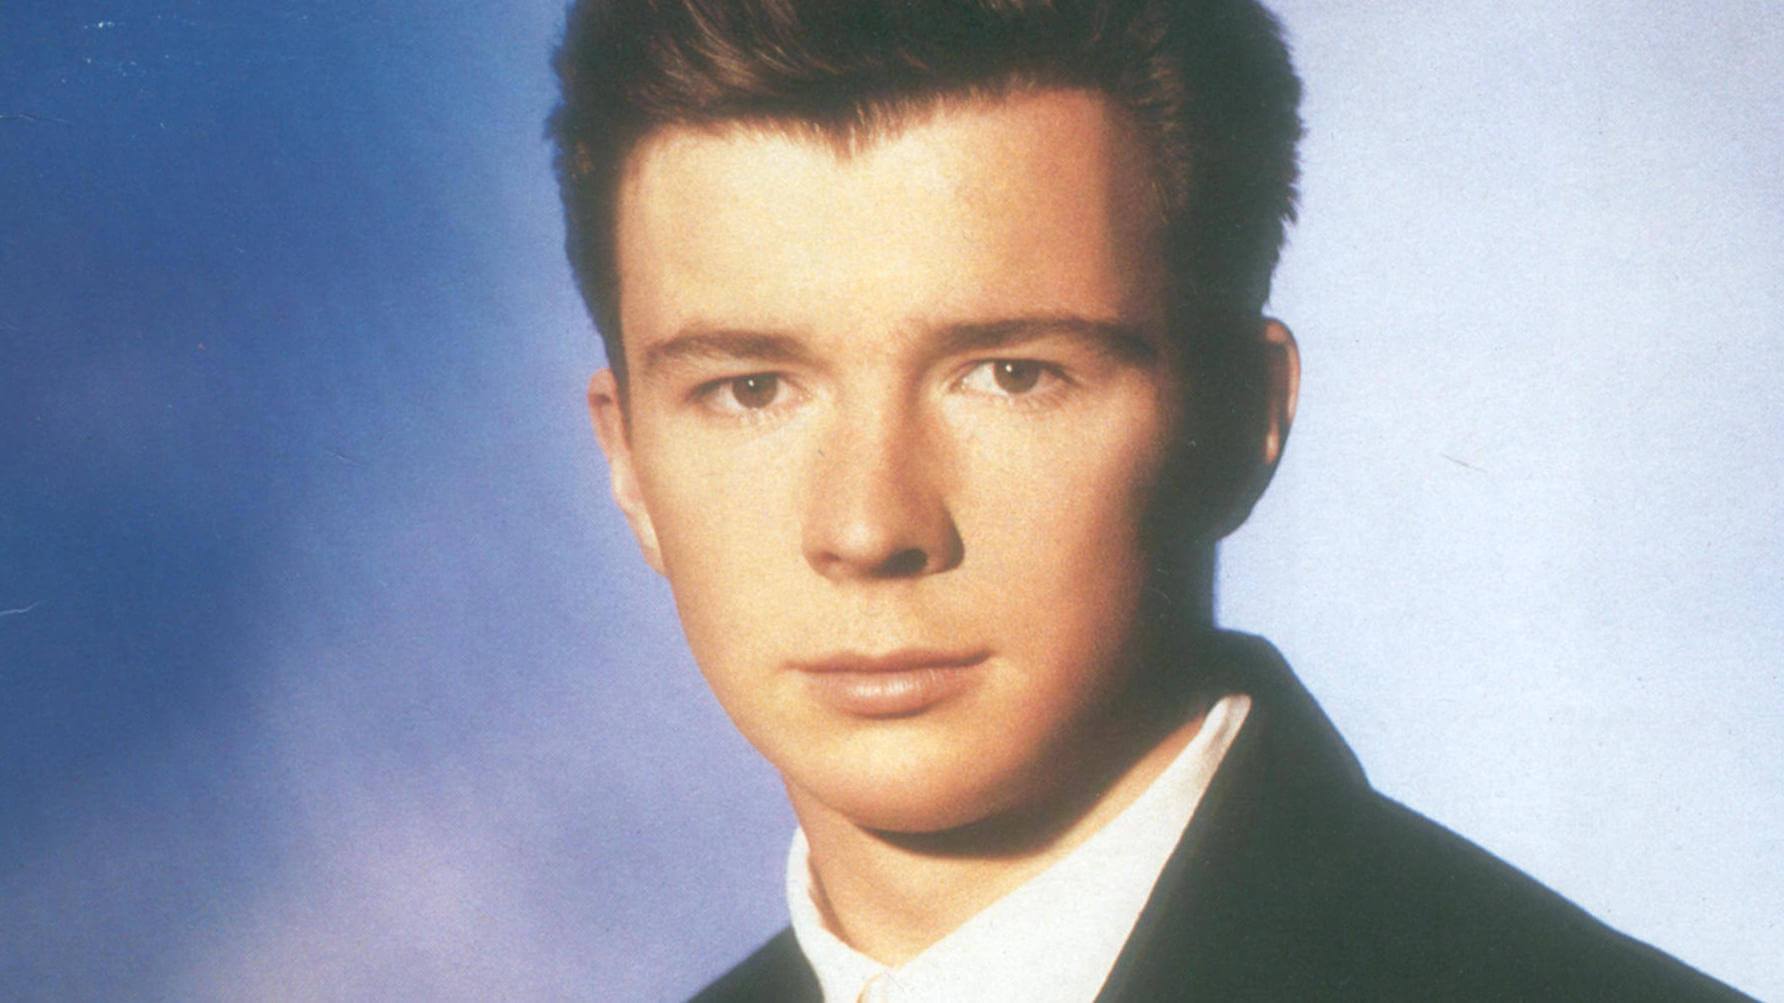 Rick Astley - Never Gonna Give You Up - in the 80s.